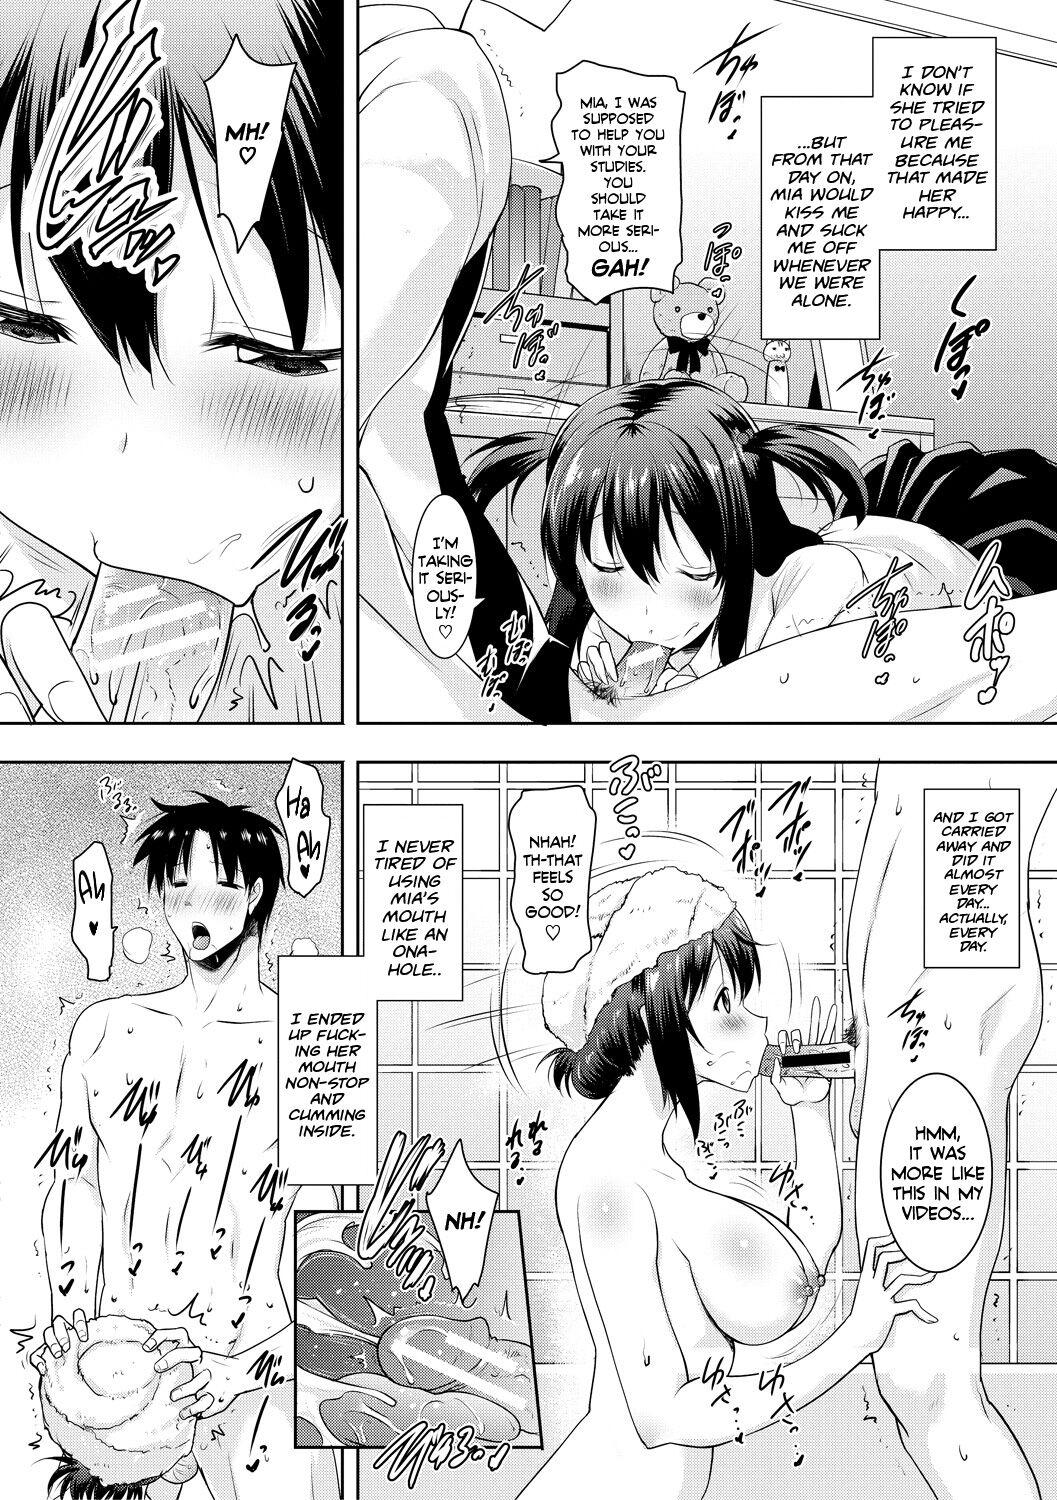 [Pony-R] I Can't Live Without My Little Sister's Tongue Chapter 01-02 + Secret Baby-making Sex with a Big-titted Mother and Daughter! (Kyonyuu Oyako no Shita to Shikyuu ni Renzoku Shasei) [English] [Team Rabu2] [Digital] 22